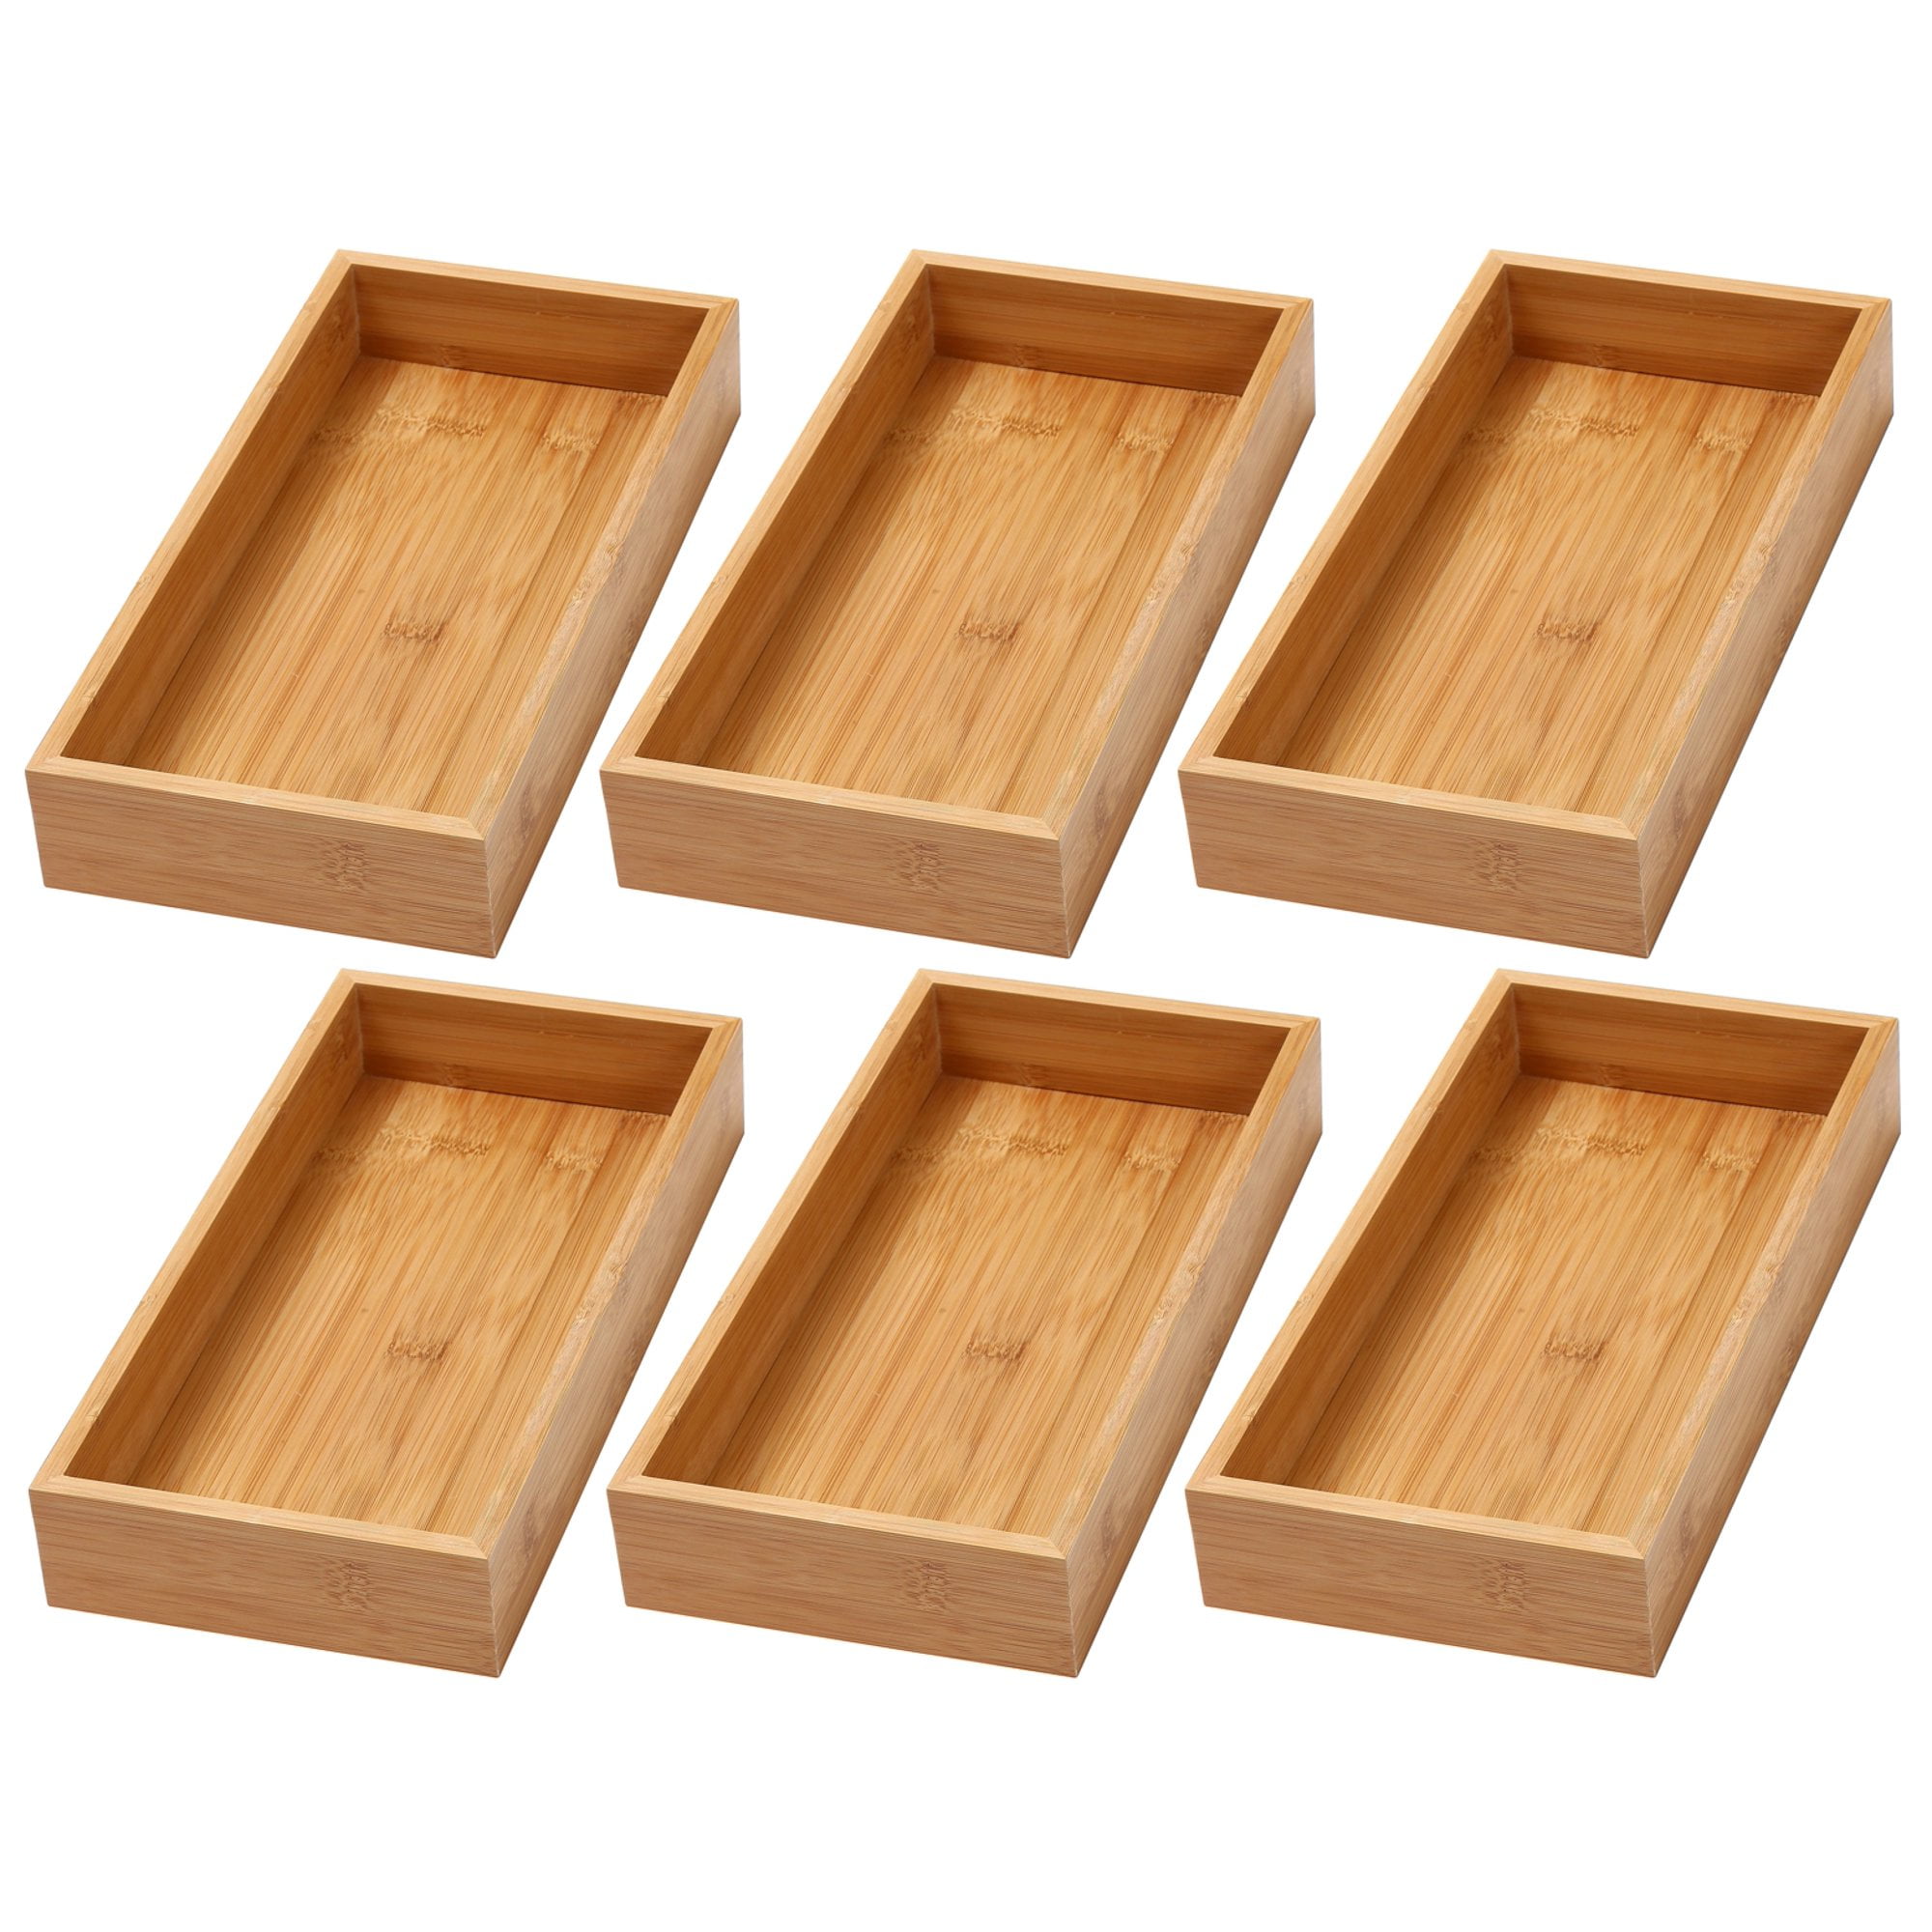 Bamboo Drawer Organizer and 6 Storage Box Dividers Set,8 Compartment Organization Tray Holder for Craft,Sewing,Office,Bathroom.Kitchen